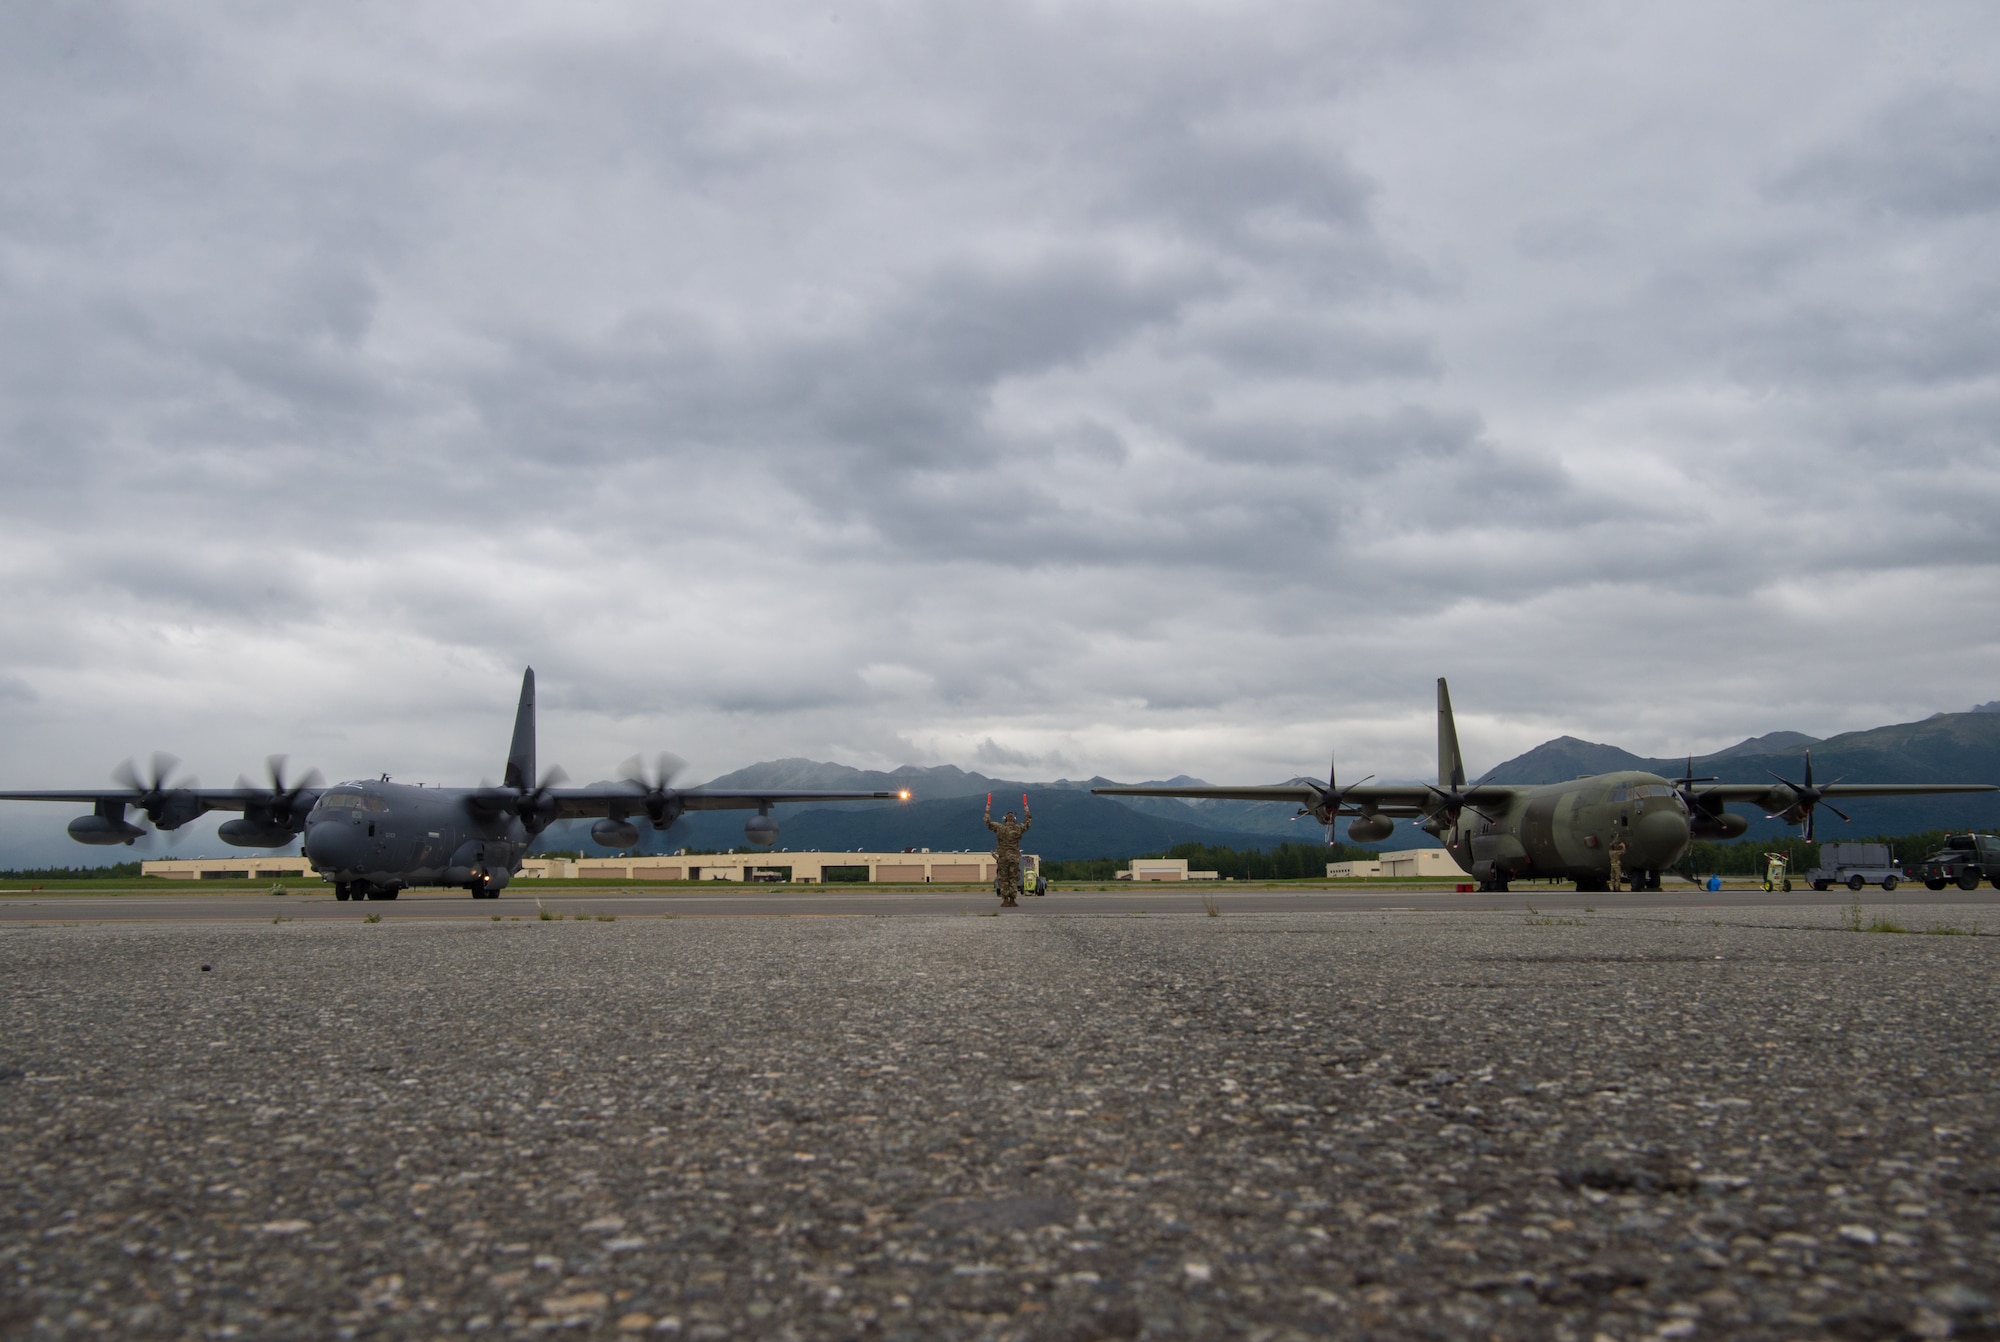 A C-130J Super Hercules from Kadena Air Force Base, Japan, and a C-130J Hercules from the United Kingdom Royal Air Force prepare for flight during Red Flag-Alaska 18-3 at Joint Base Elmendorf-Richardson, Alaska, Aug. 13, 2018. In RF-A 18-3 U.S. Army and Navy aviators in addition to Air Force Airmen are expected to fly, maintain and support more than 100 aircraft from more than a dozen units during this iteration of the exercise.